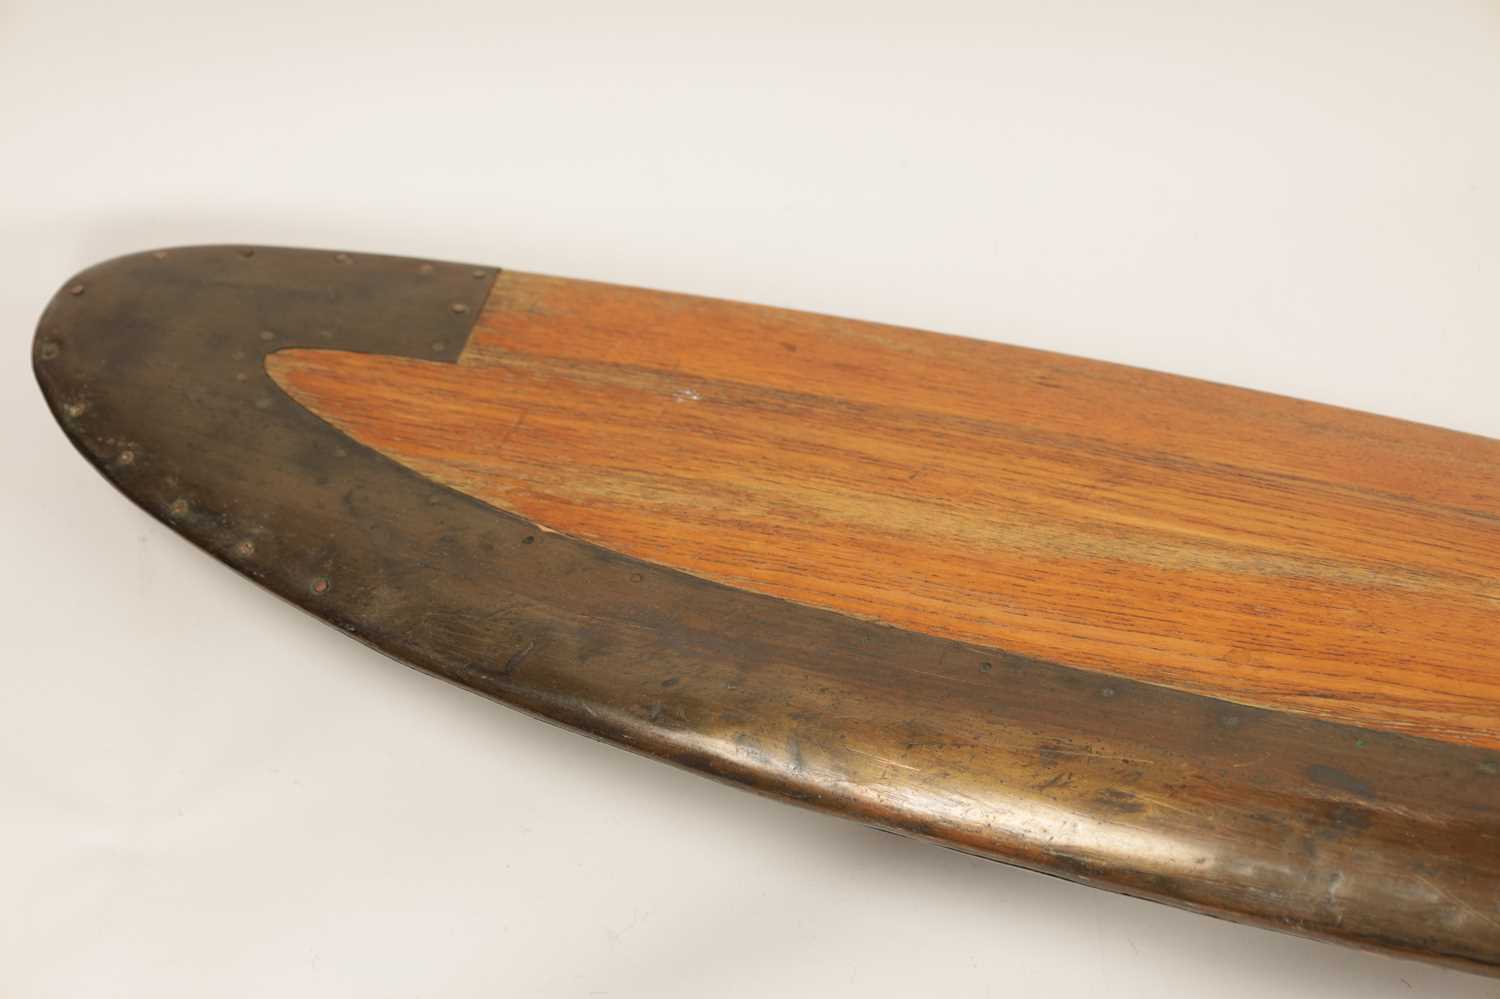 AN EARLY 20TH CENTURY WW1 PROPELLER BLADE - Image 3 of 8